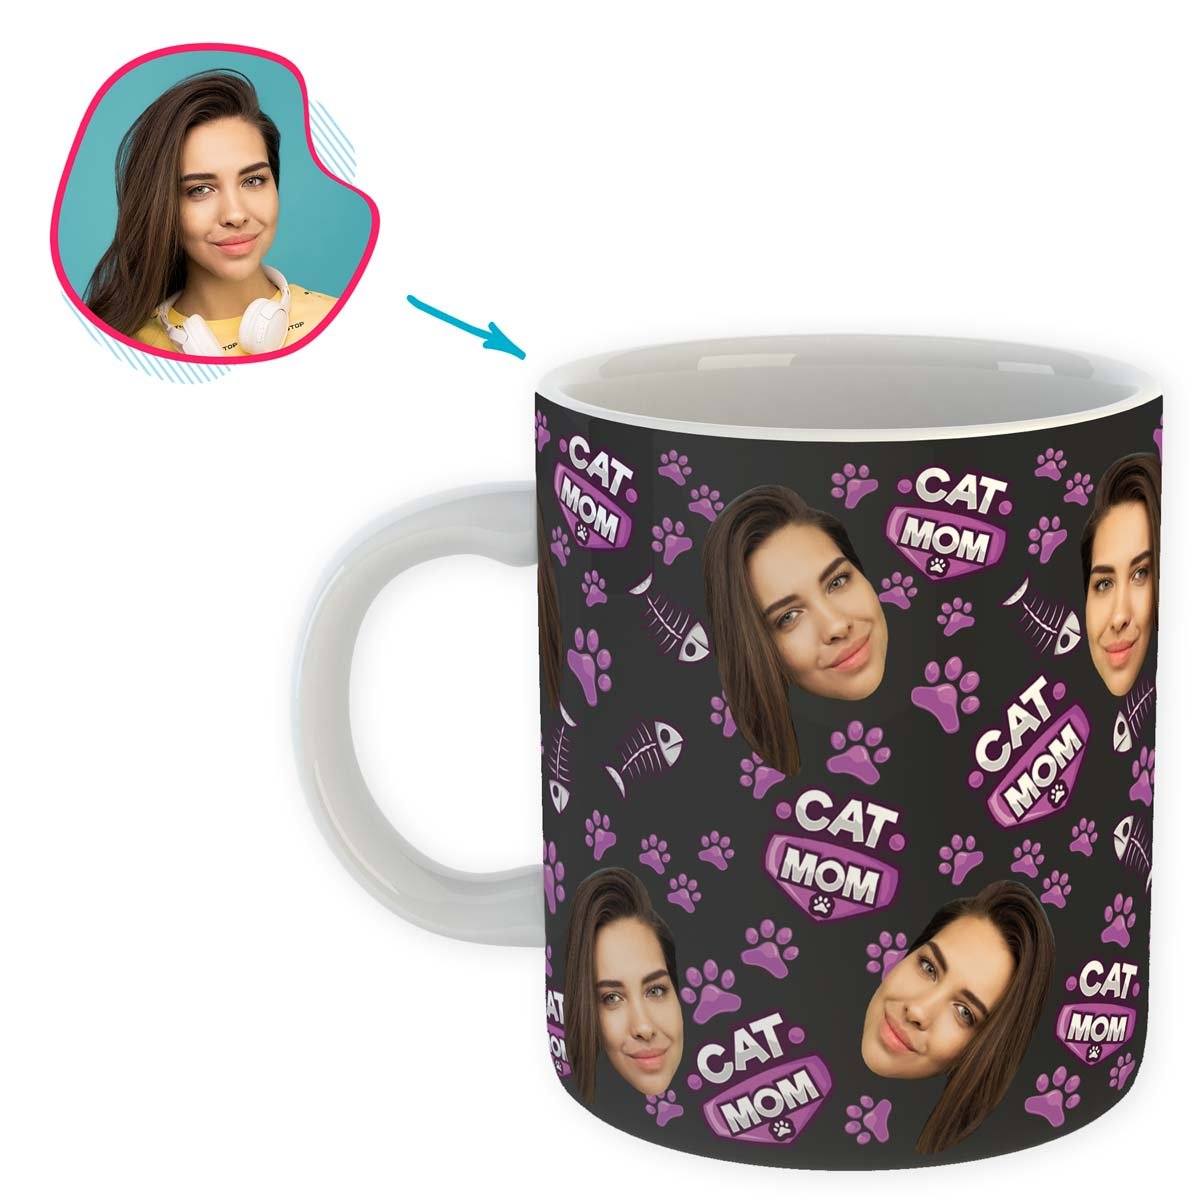 dark Cat Mom mug personalized with photo of face printed on it